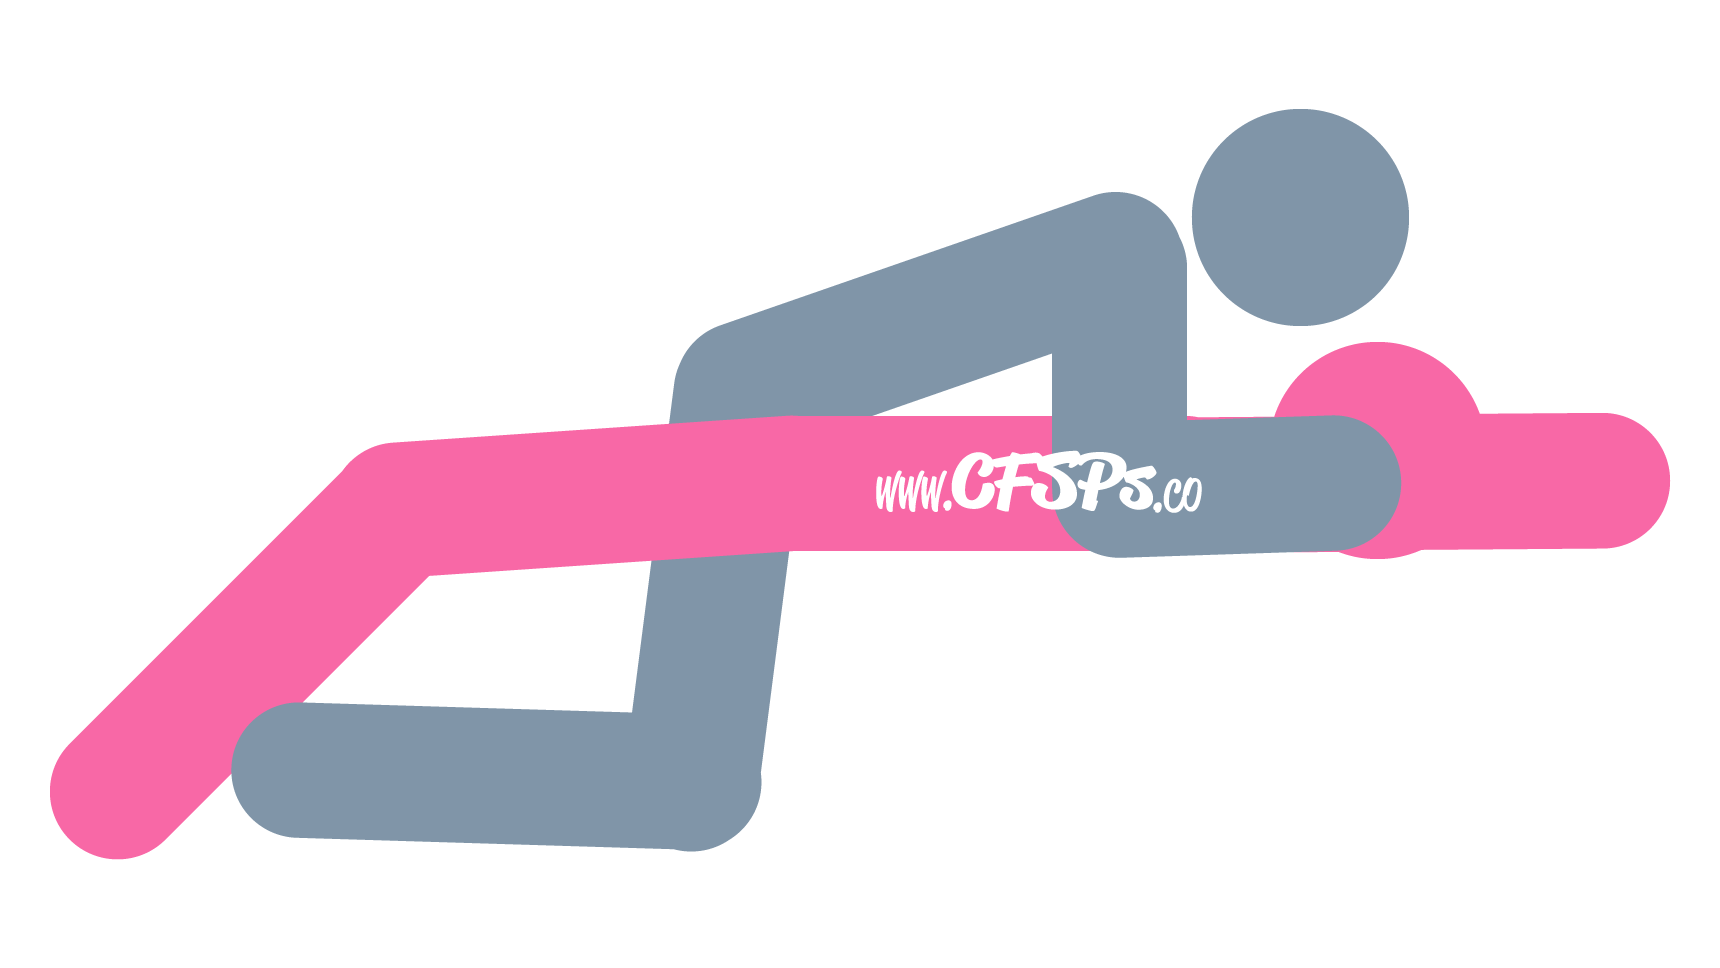 This stick figure image depicts a man and woman having sex in the Laid Back sex position. The woman is lying on her back on an ottoman with her legs open a little and her feet on the floor. The man is kneeling between her legs, leaning forward, and supporting his body with his elbows near her sides.